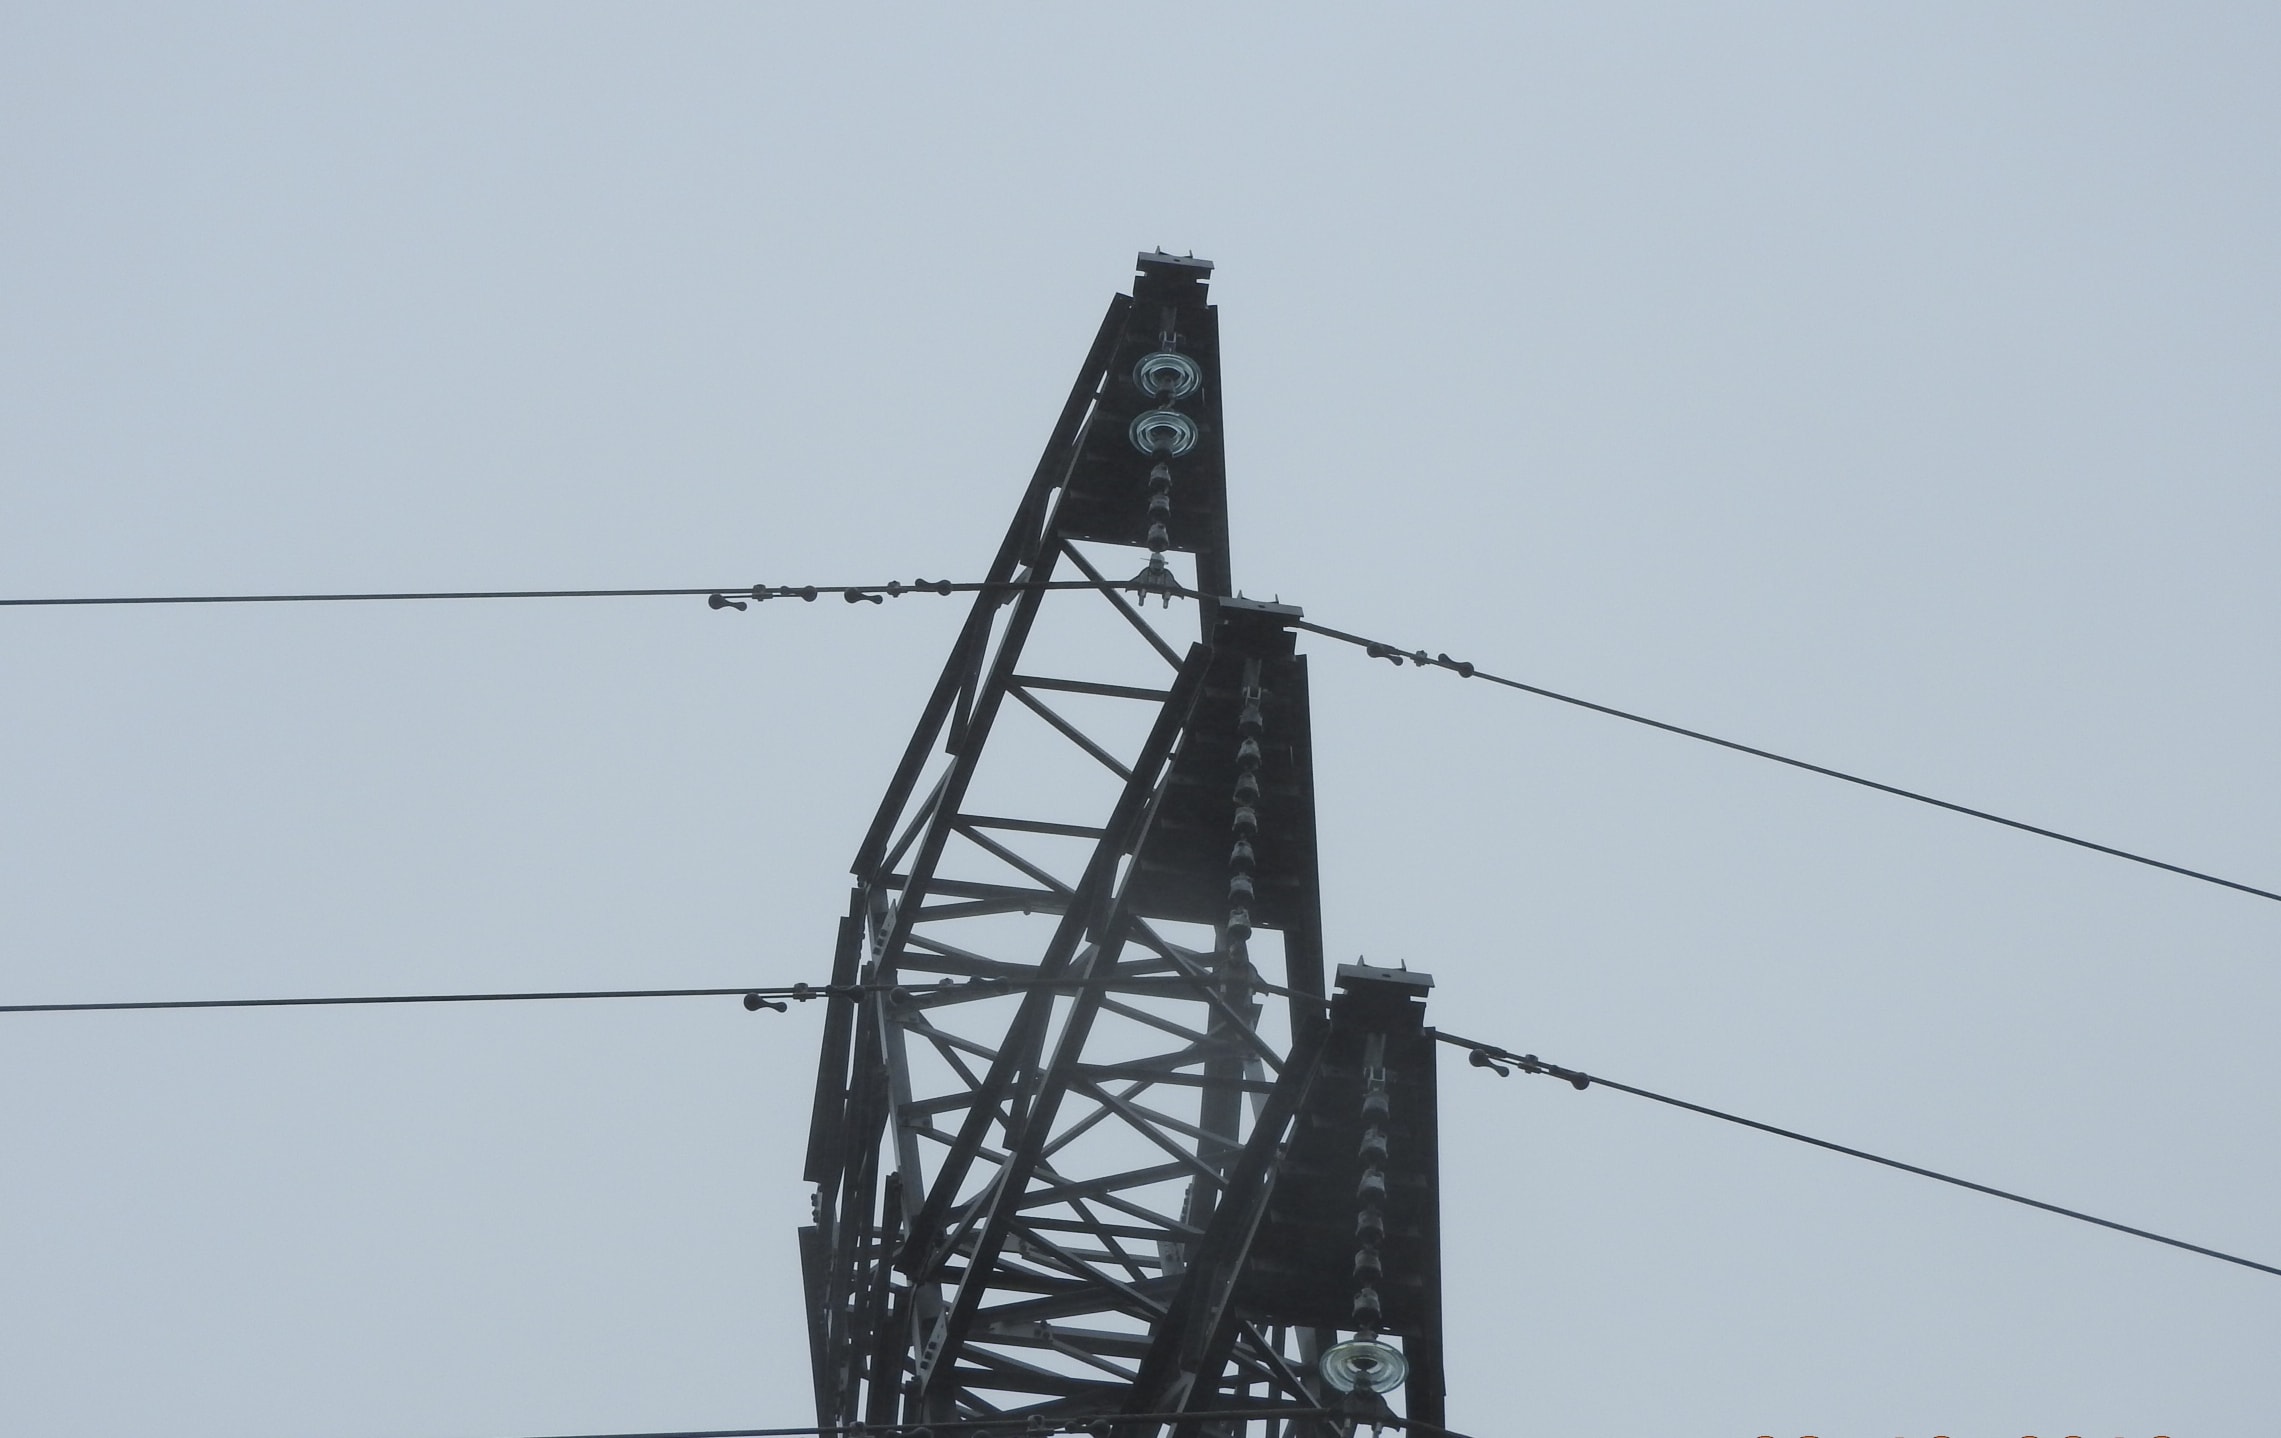 Three transmission towers have a number of their glass insulators damaged.